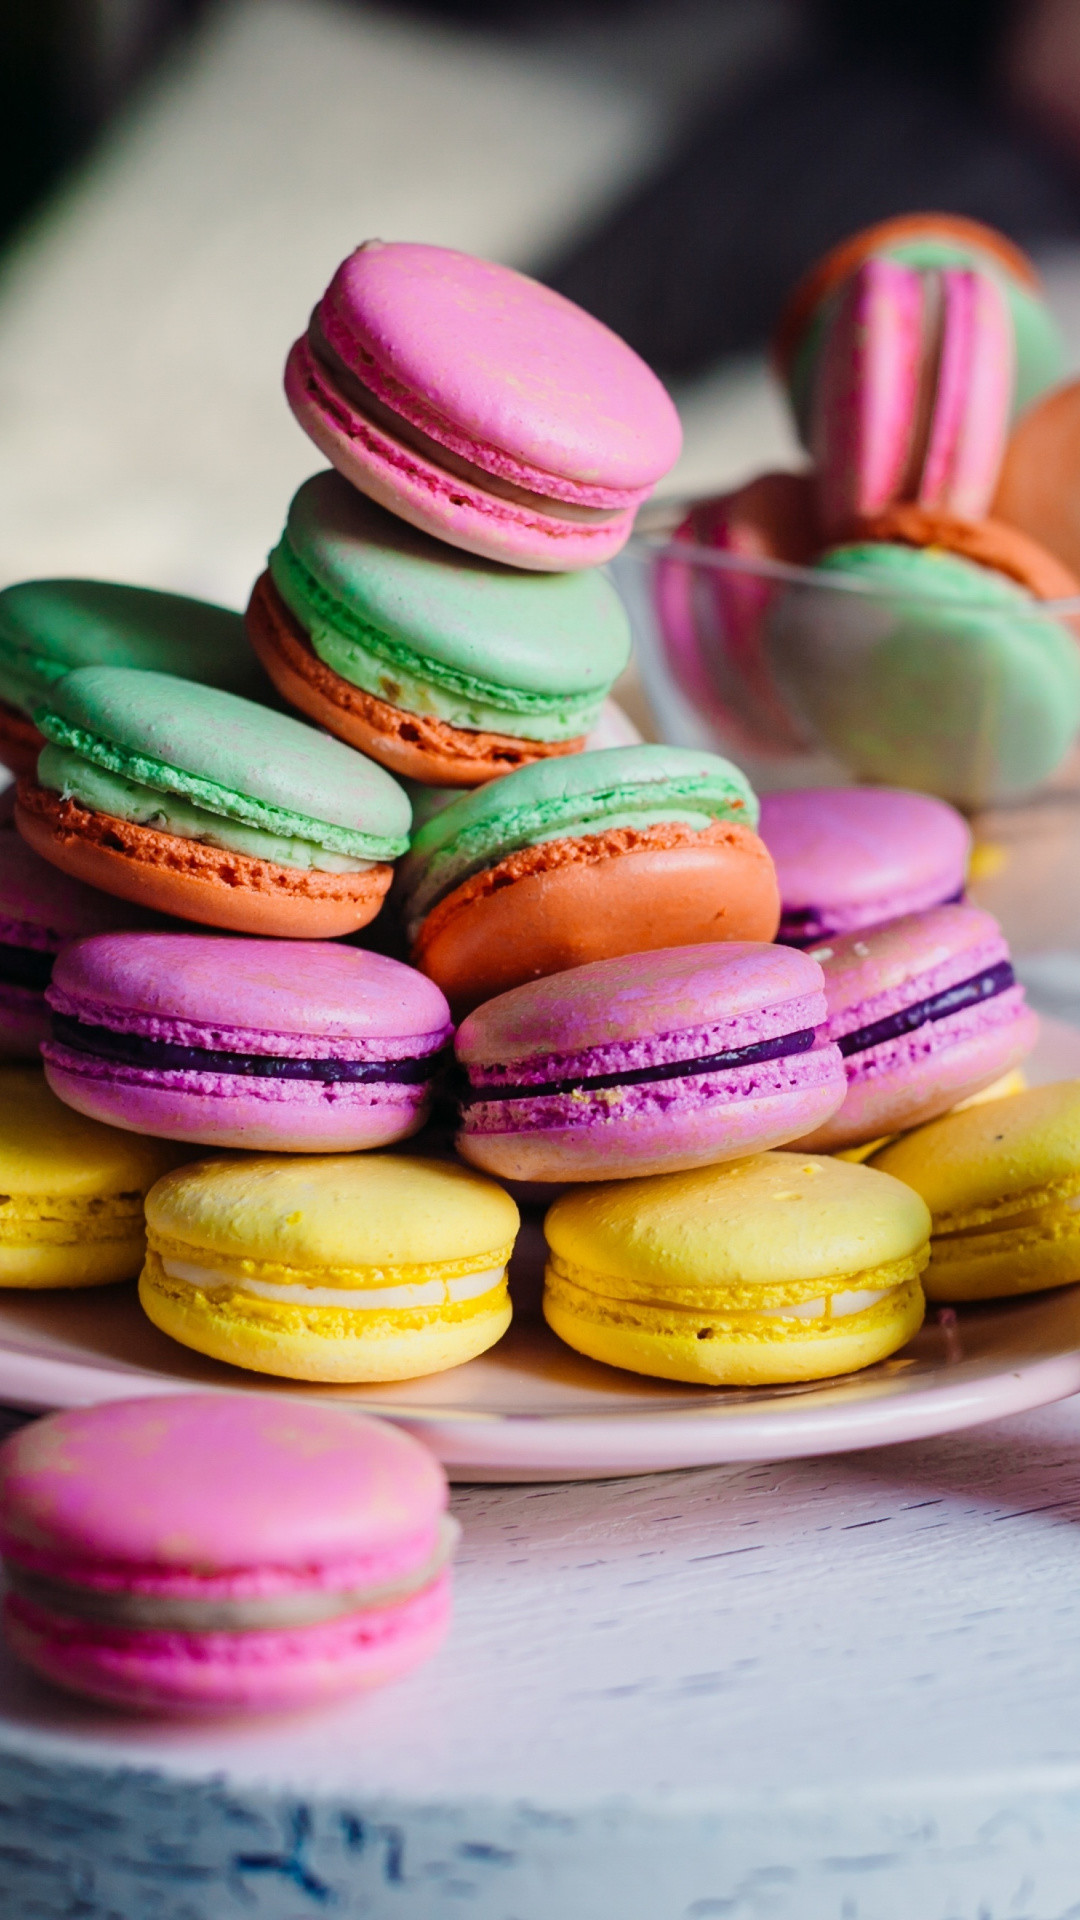 1080x1920  wallpaper Macarons, colorful, sweets